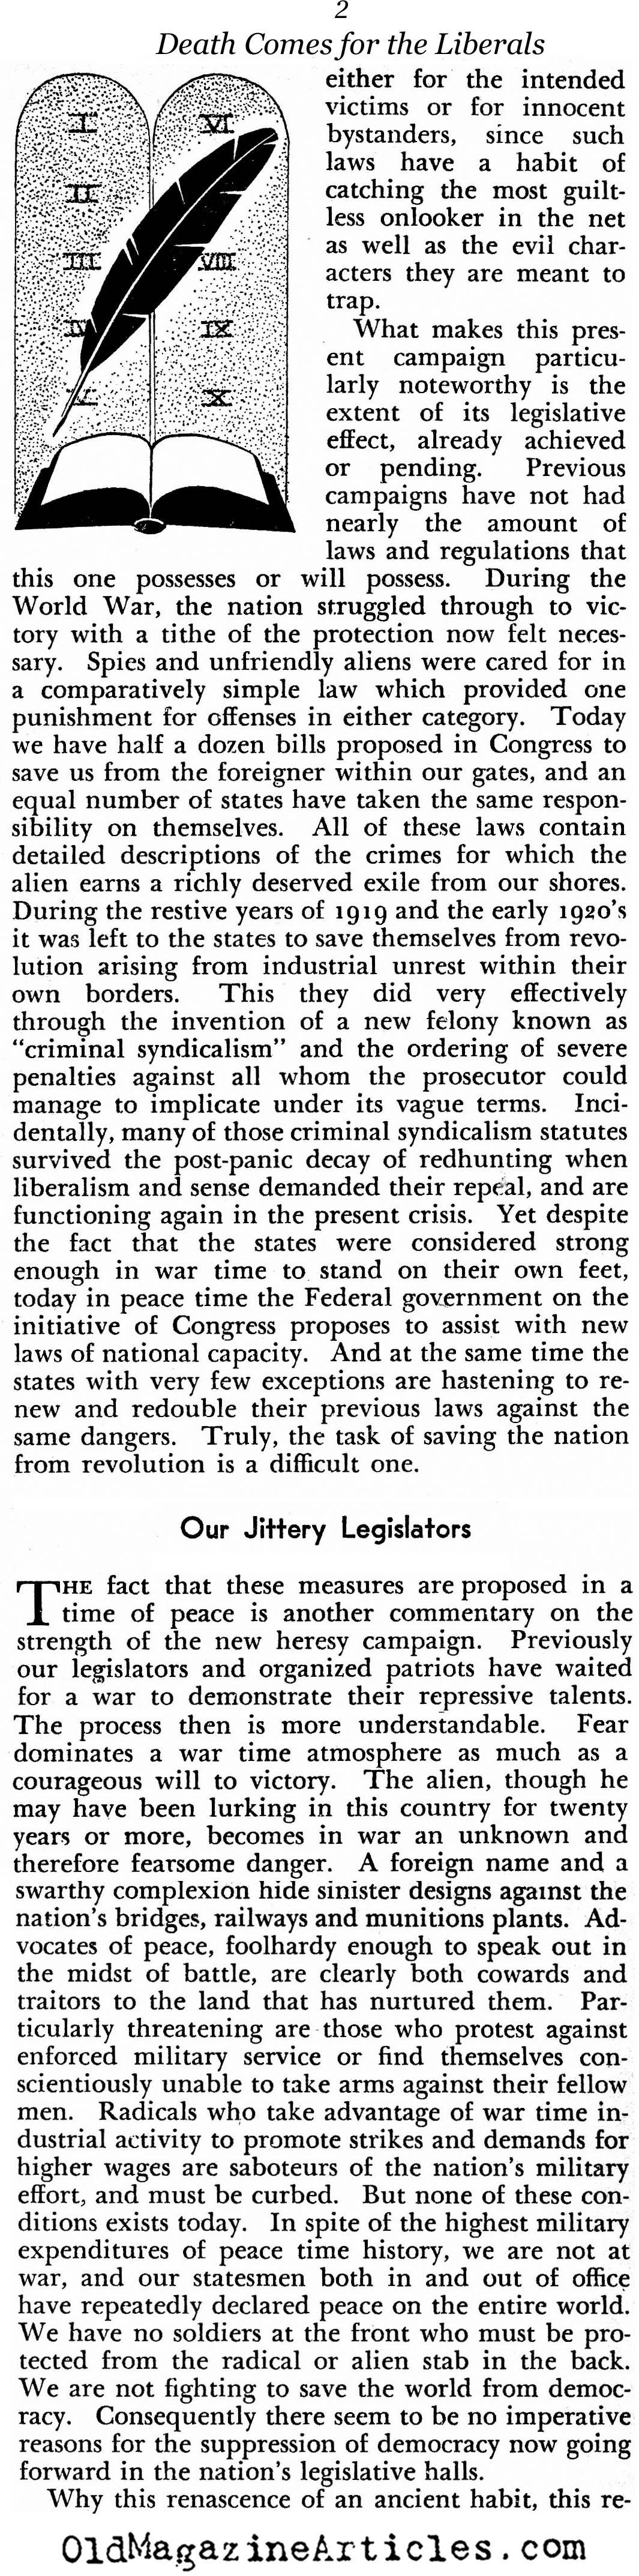 Tyranny At Home (New Outlook Magazine, 1935)